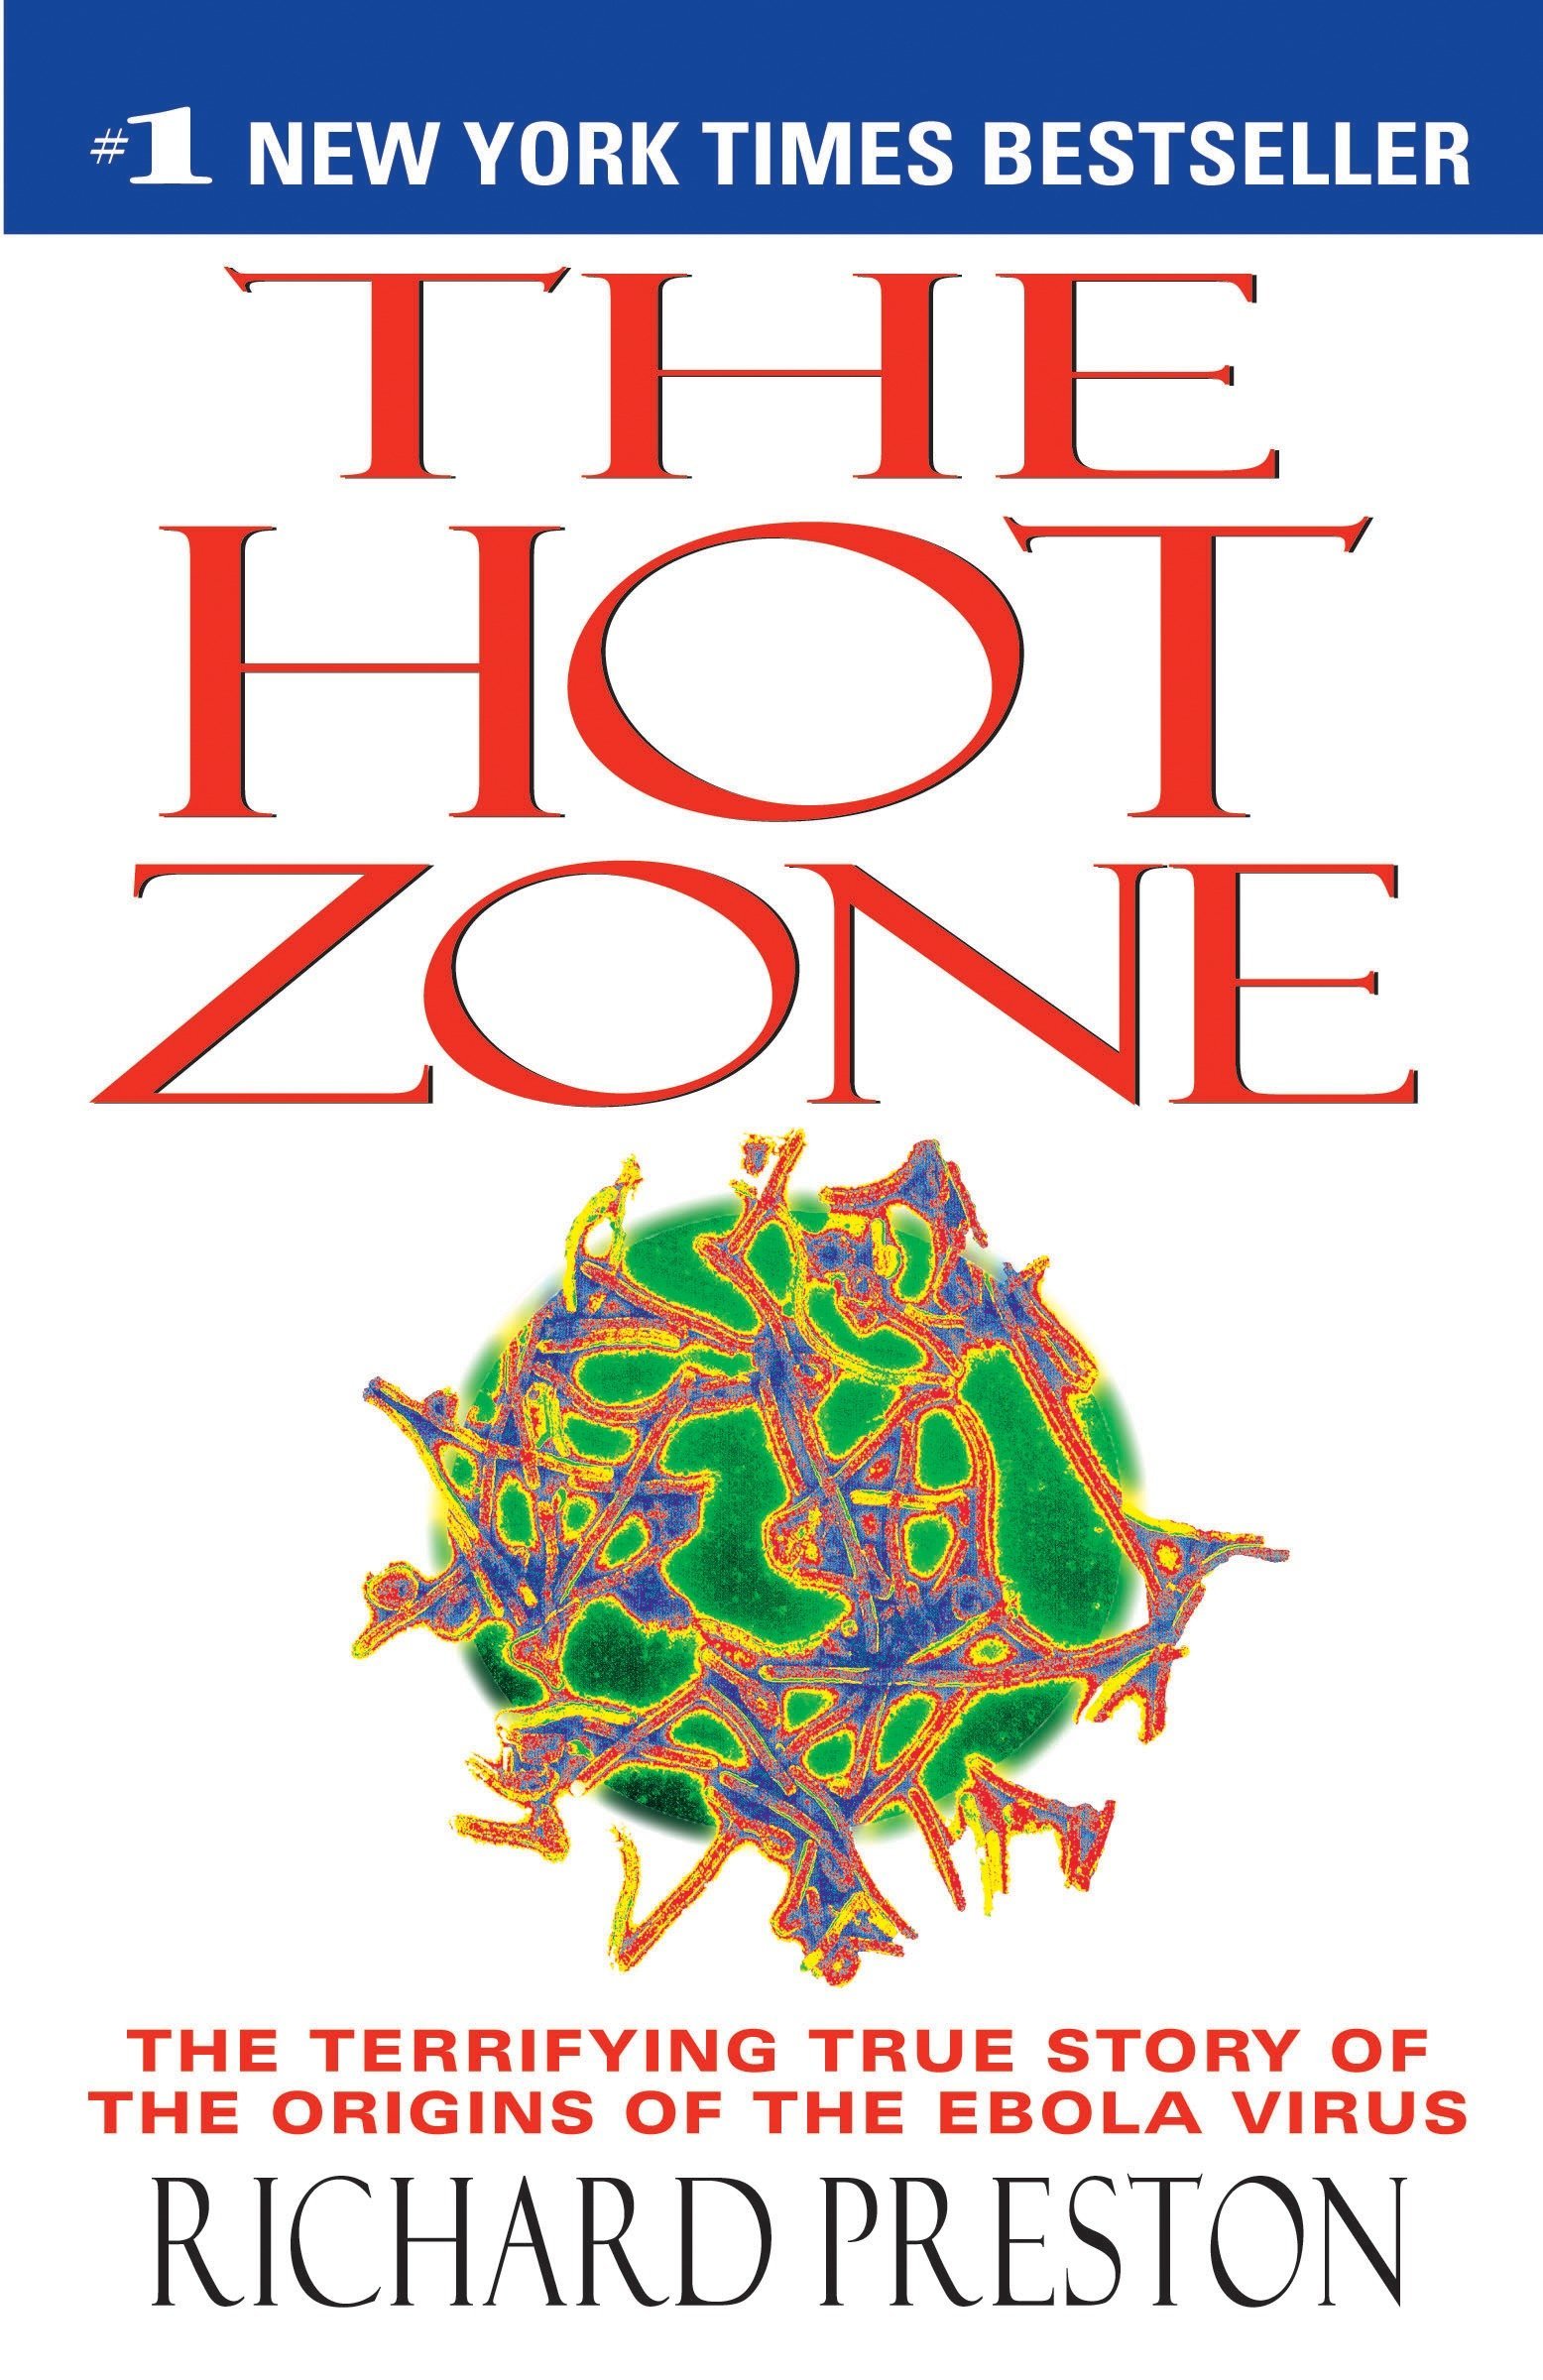 A book cover for "the hot zone" featuring the title in bold red letters against a white background, with a vibrant, colorful illustration of what appears to be a virus particle, and the subtitle "the terrifying true story of the origins of the ebola virus" by richard preston, marked as a #1 new york times bestseller.